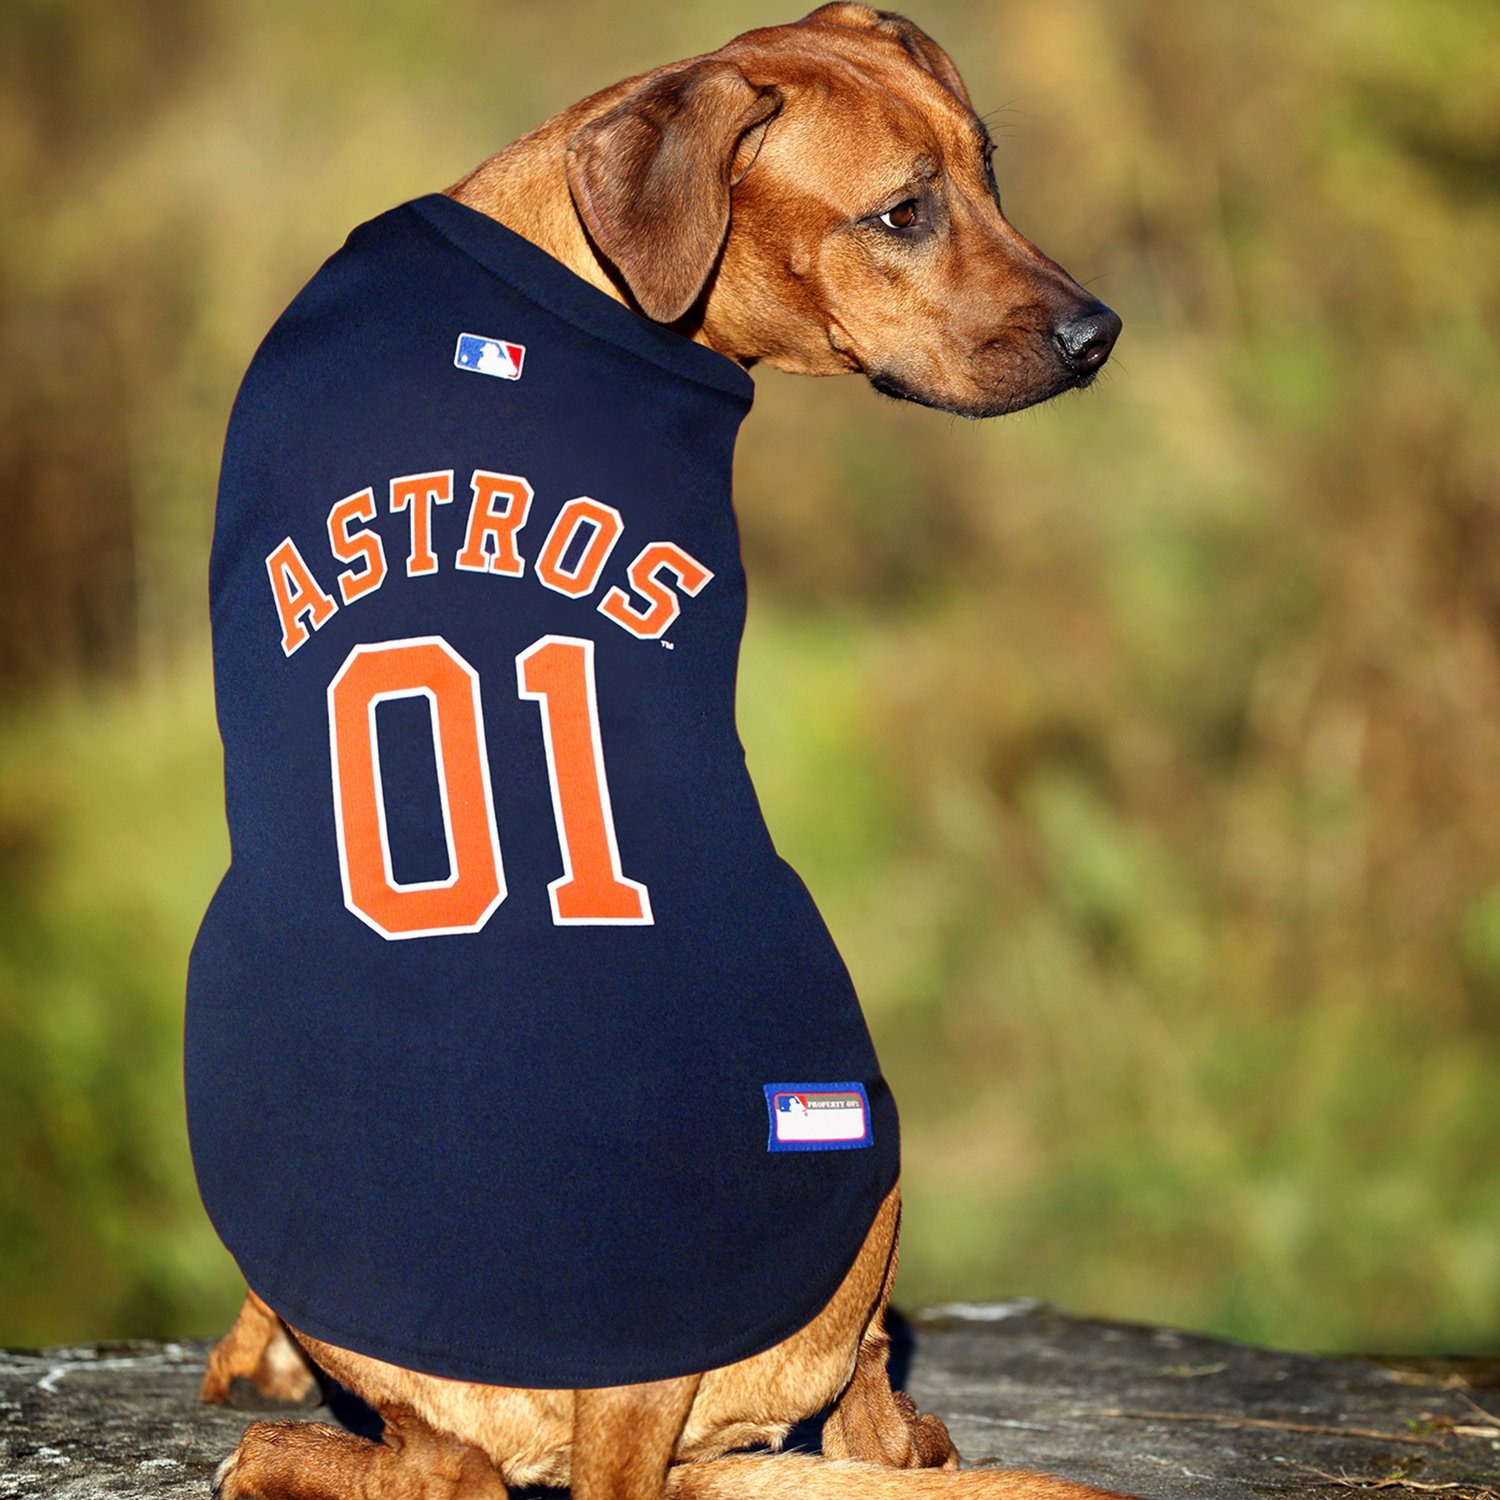 Pets First MLB Houston Astros Mesh Jersey for Dogs and Cats - Licensed Soft  Poly-Cotton Sports Jersey - Medium